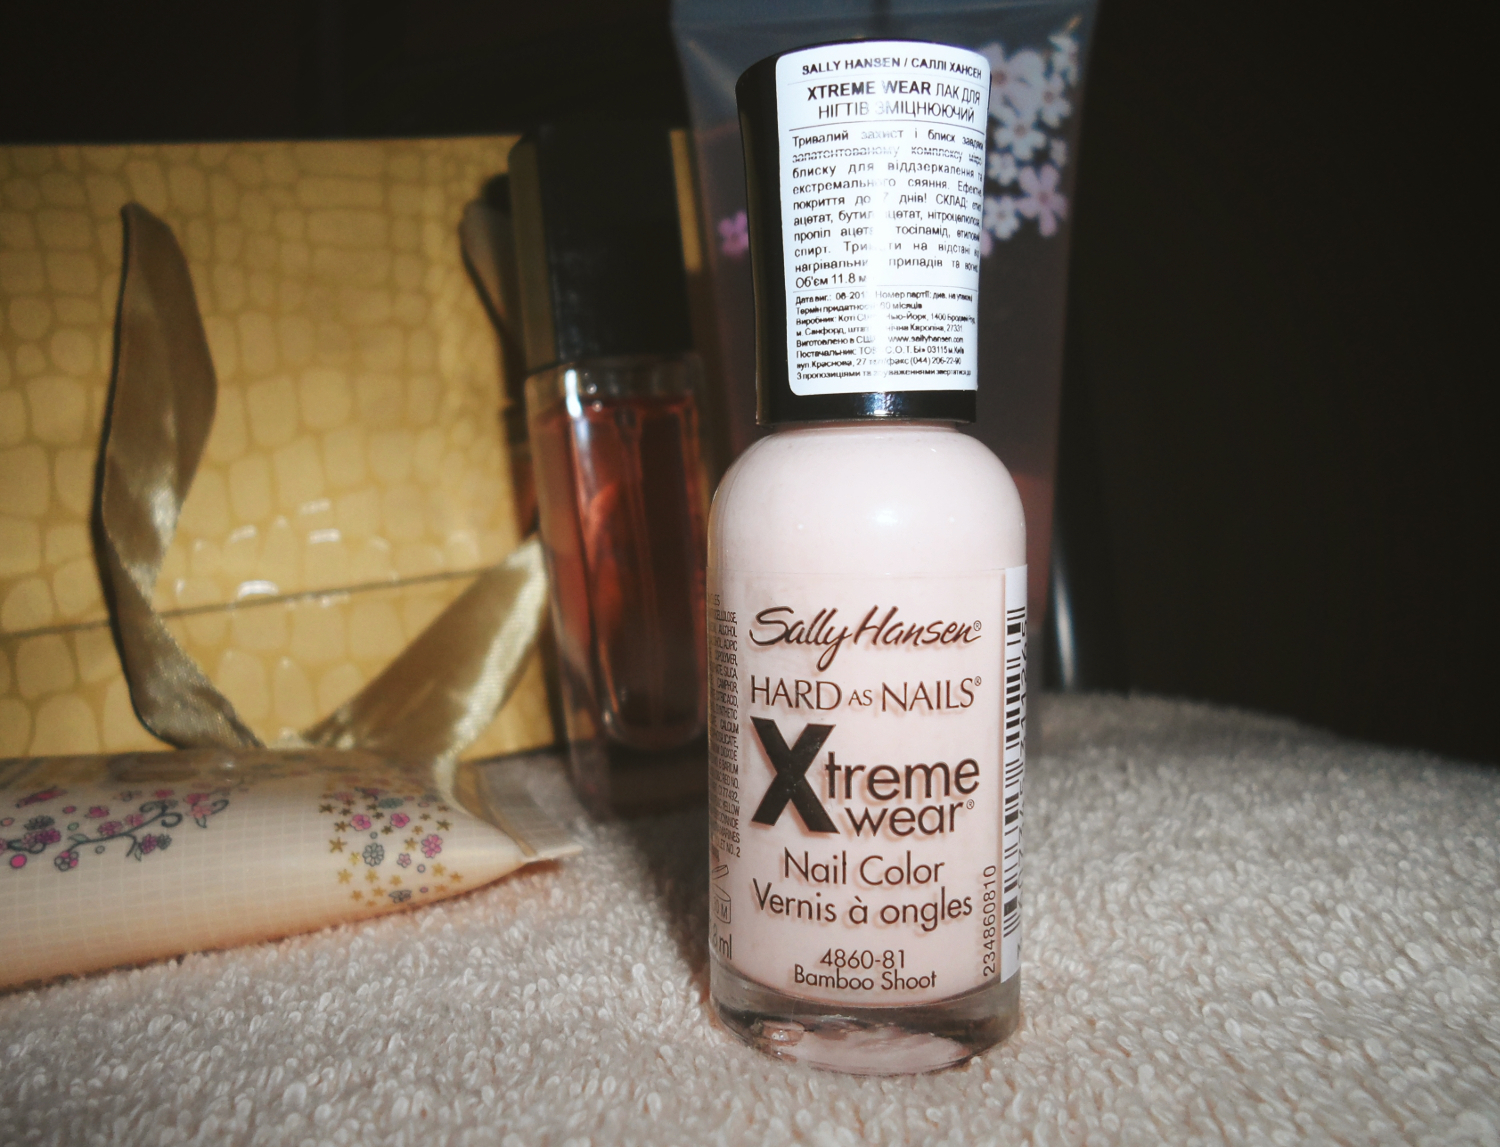 An Everyday Nail Polish 'Bamboo Shoot' by Sally Hansen | Review & Swatches  | January Girl